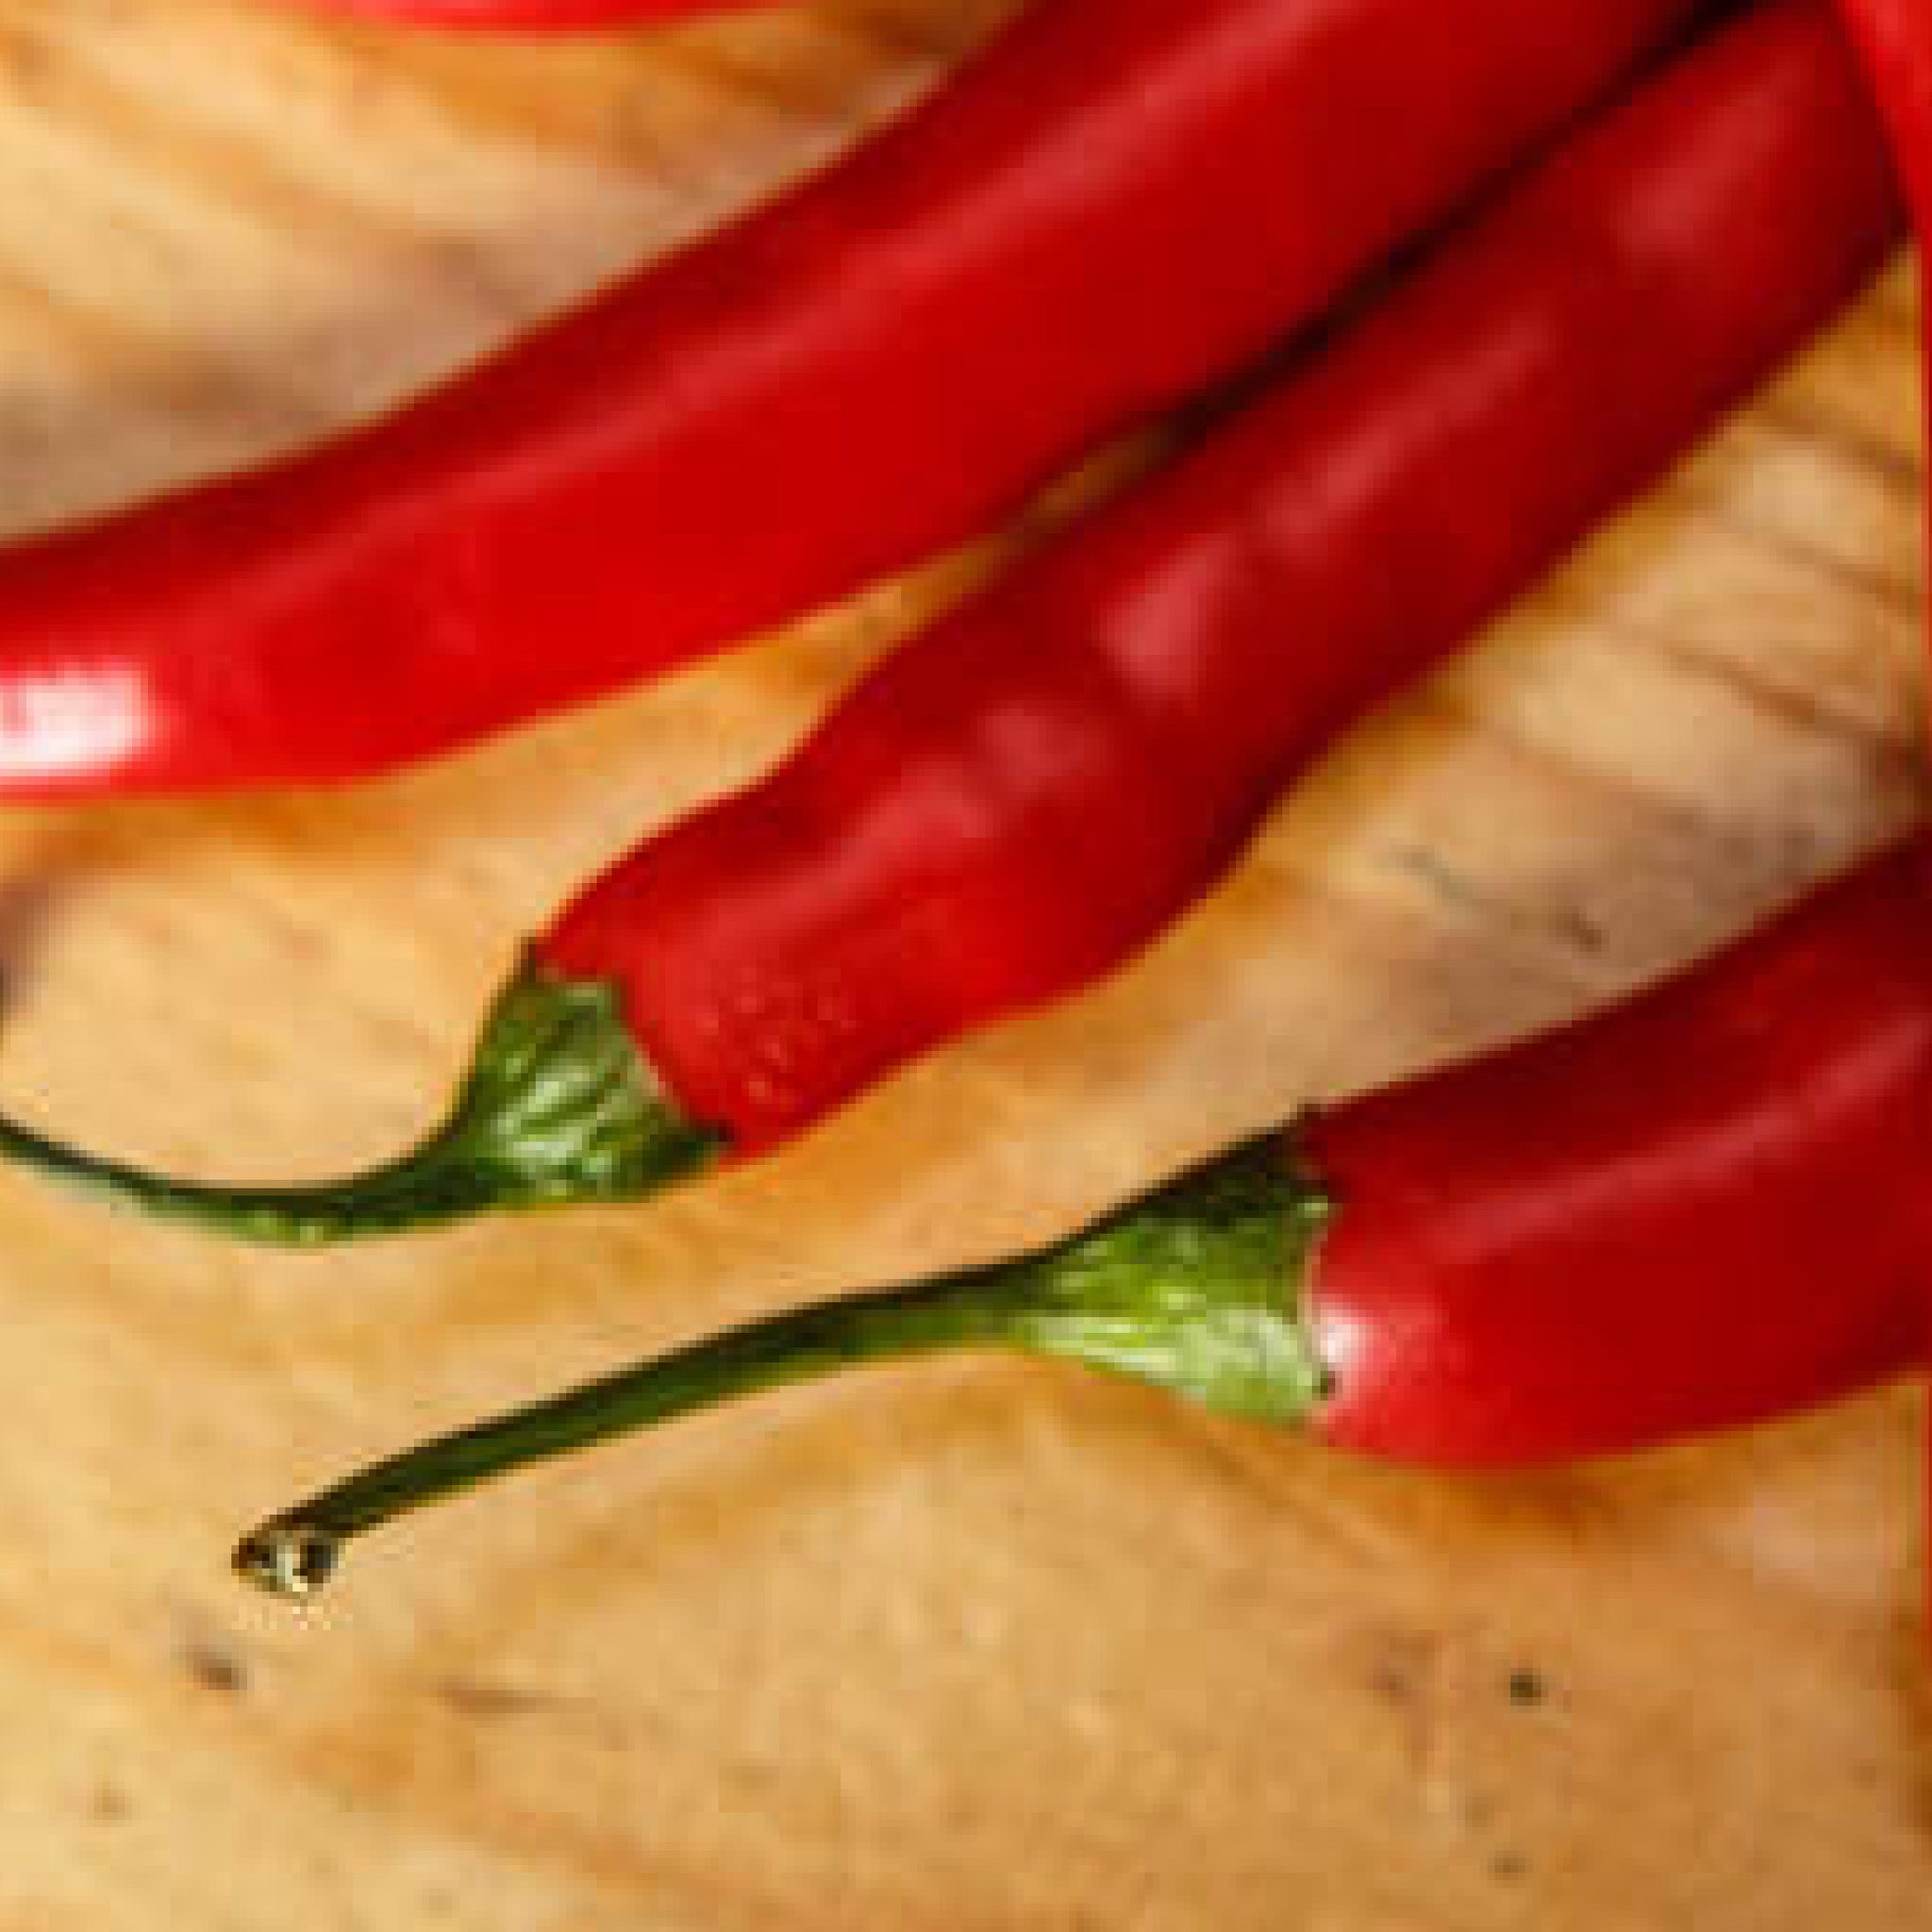 Image of red peppers.